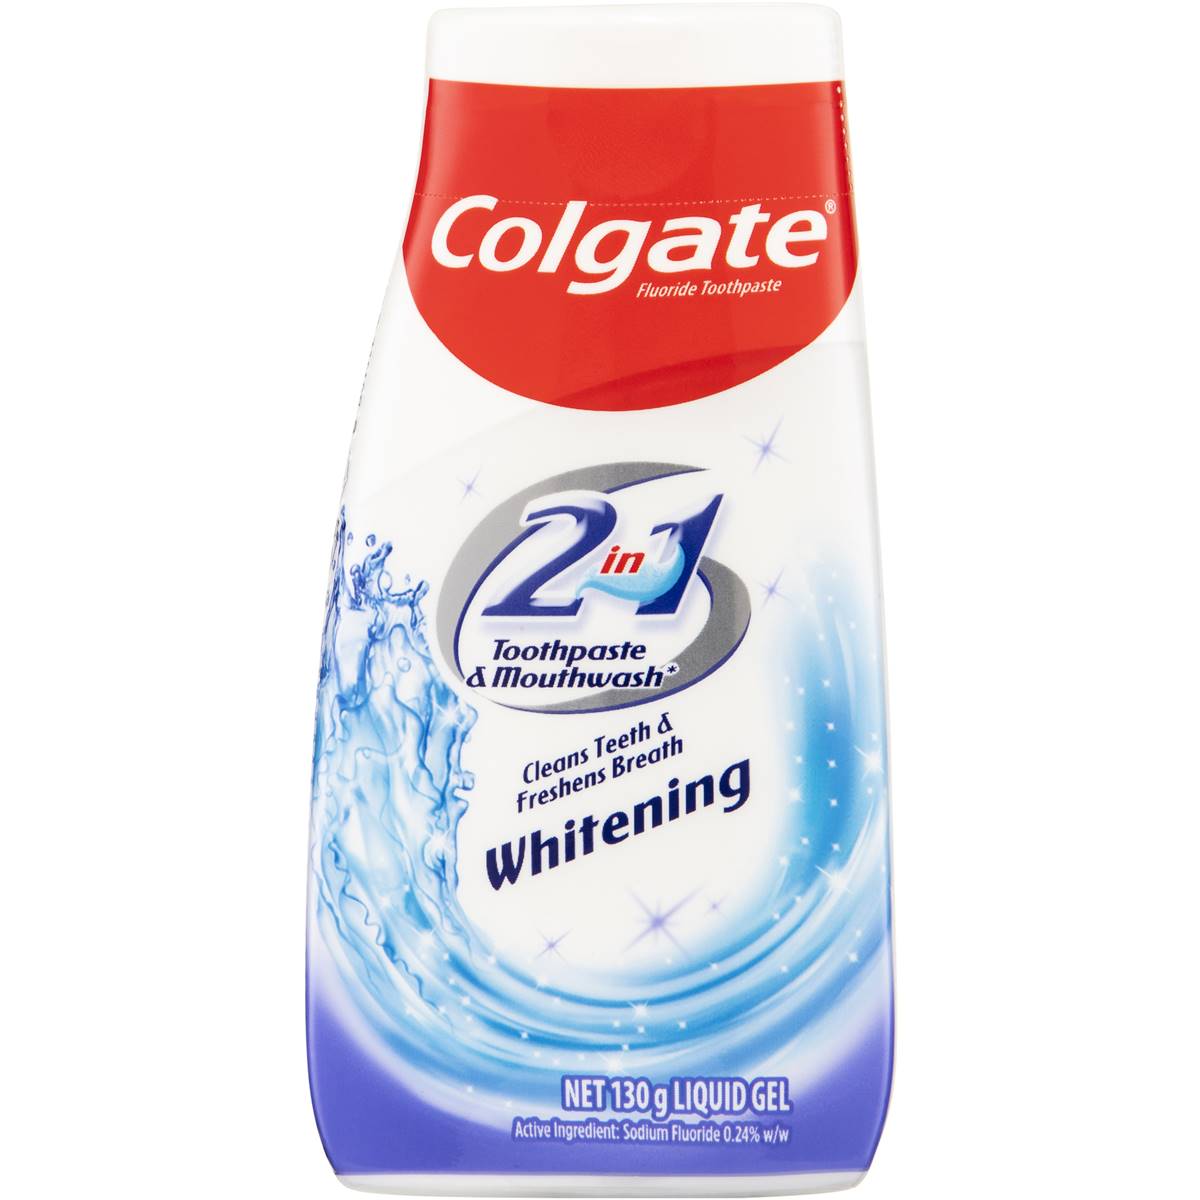 Colgate 2 In 1 Toothpaste & Mouthwash 130g